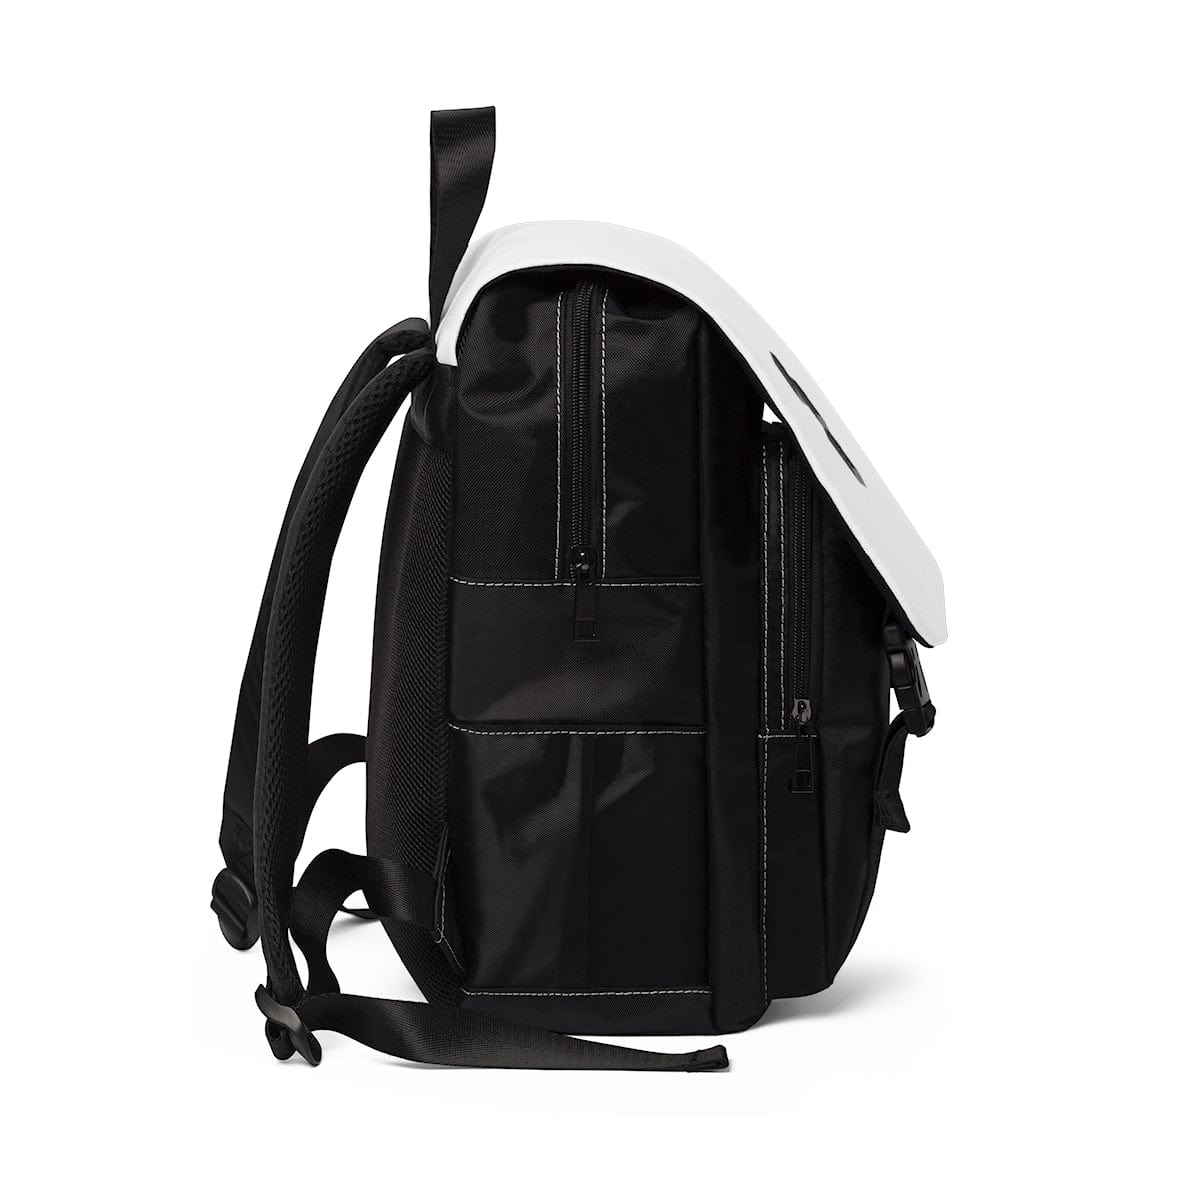 LOUIE CANVAS BACKPACK and Bag Set – Panic 39